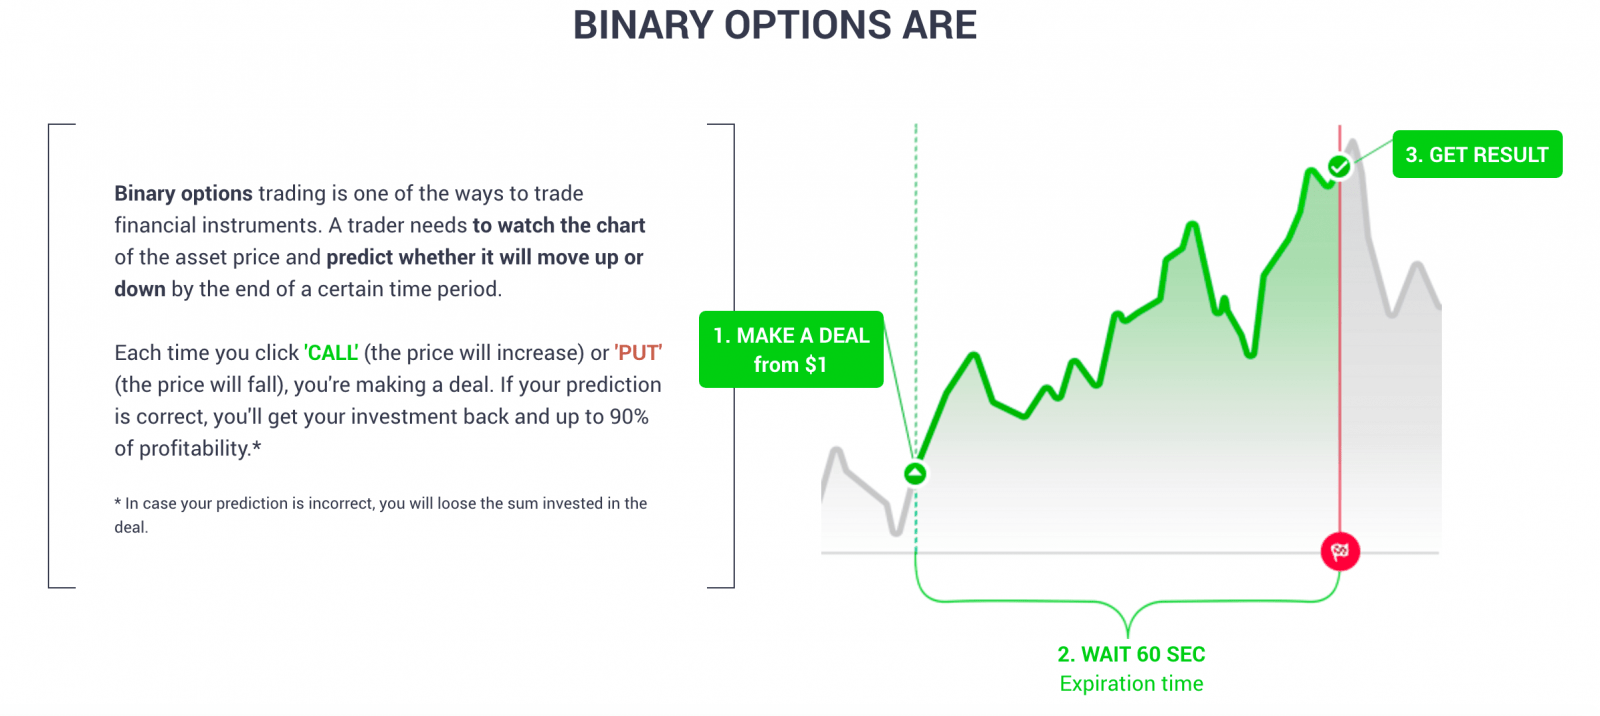 What is a binary option?